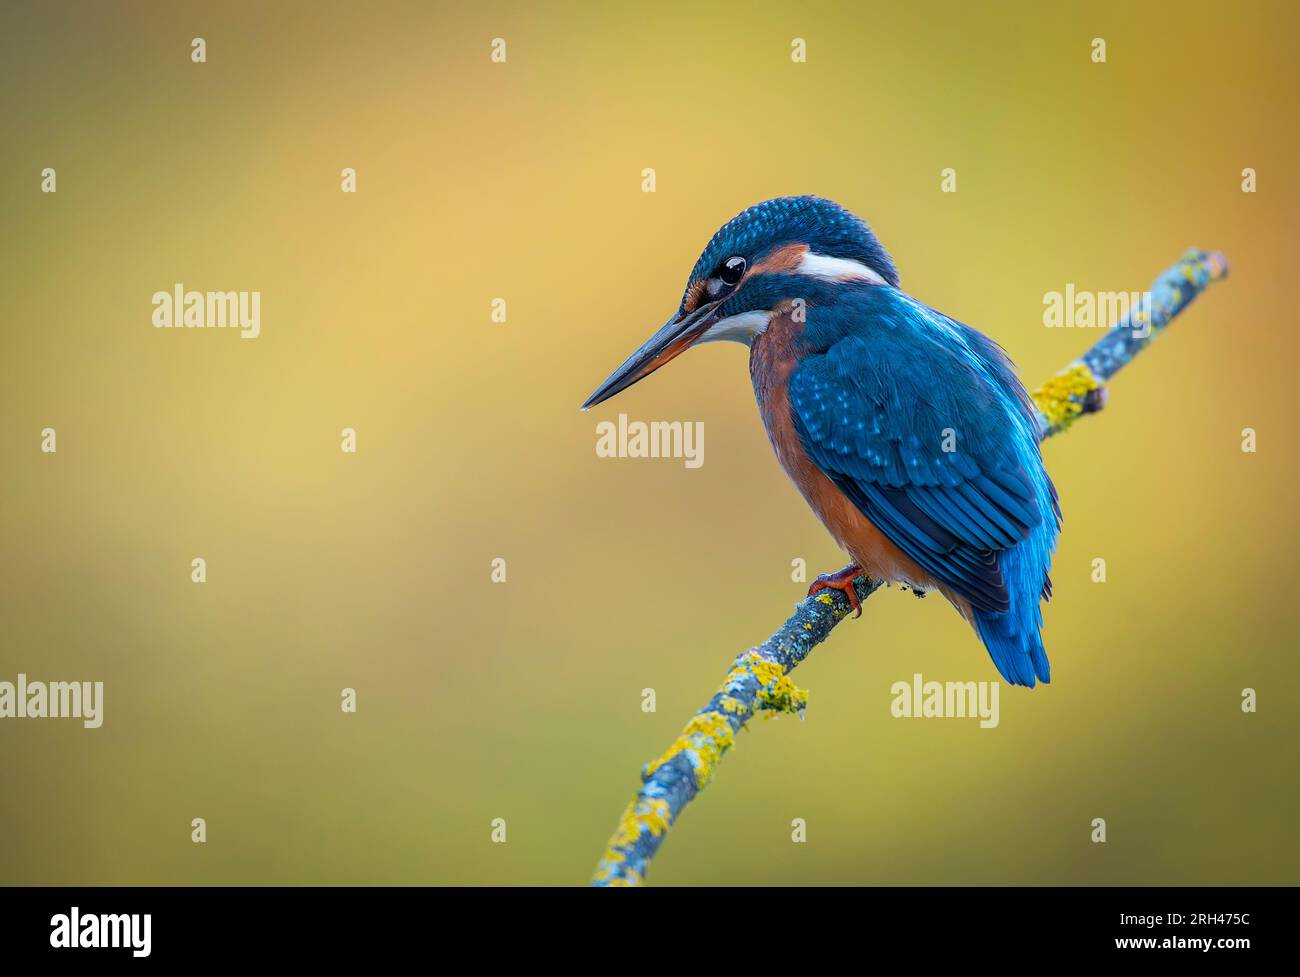 Kingfisher on a branch with warm and background Stock Photo